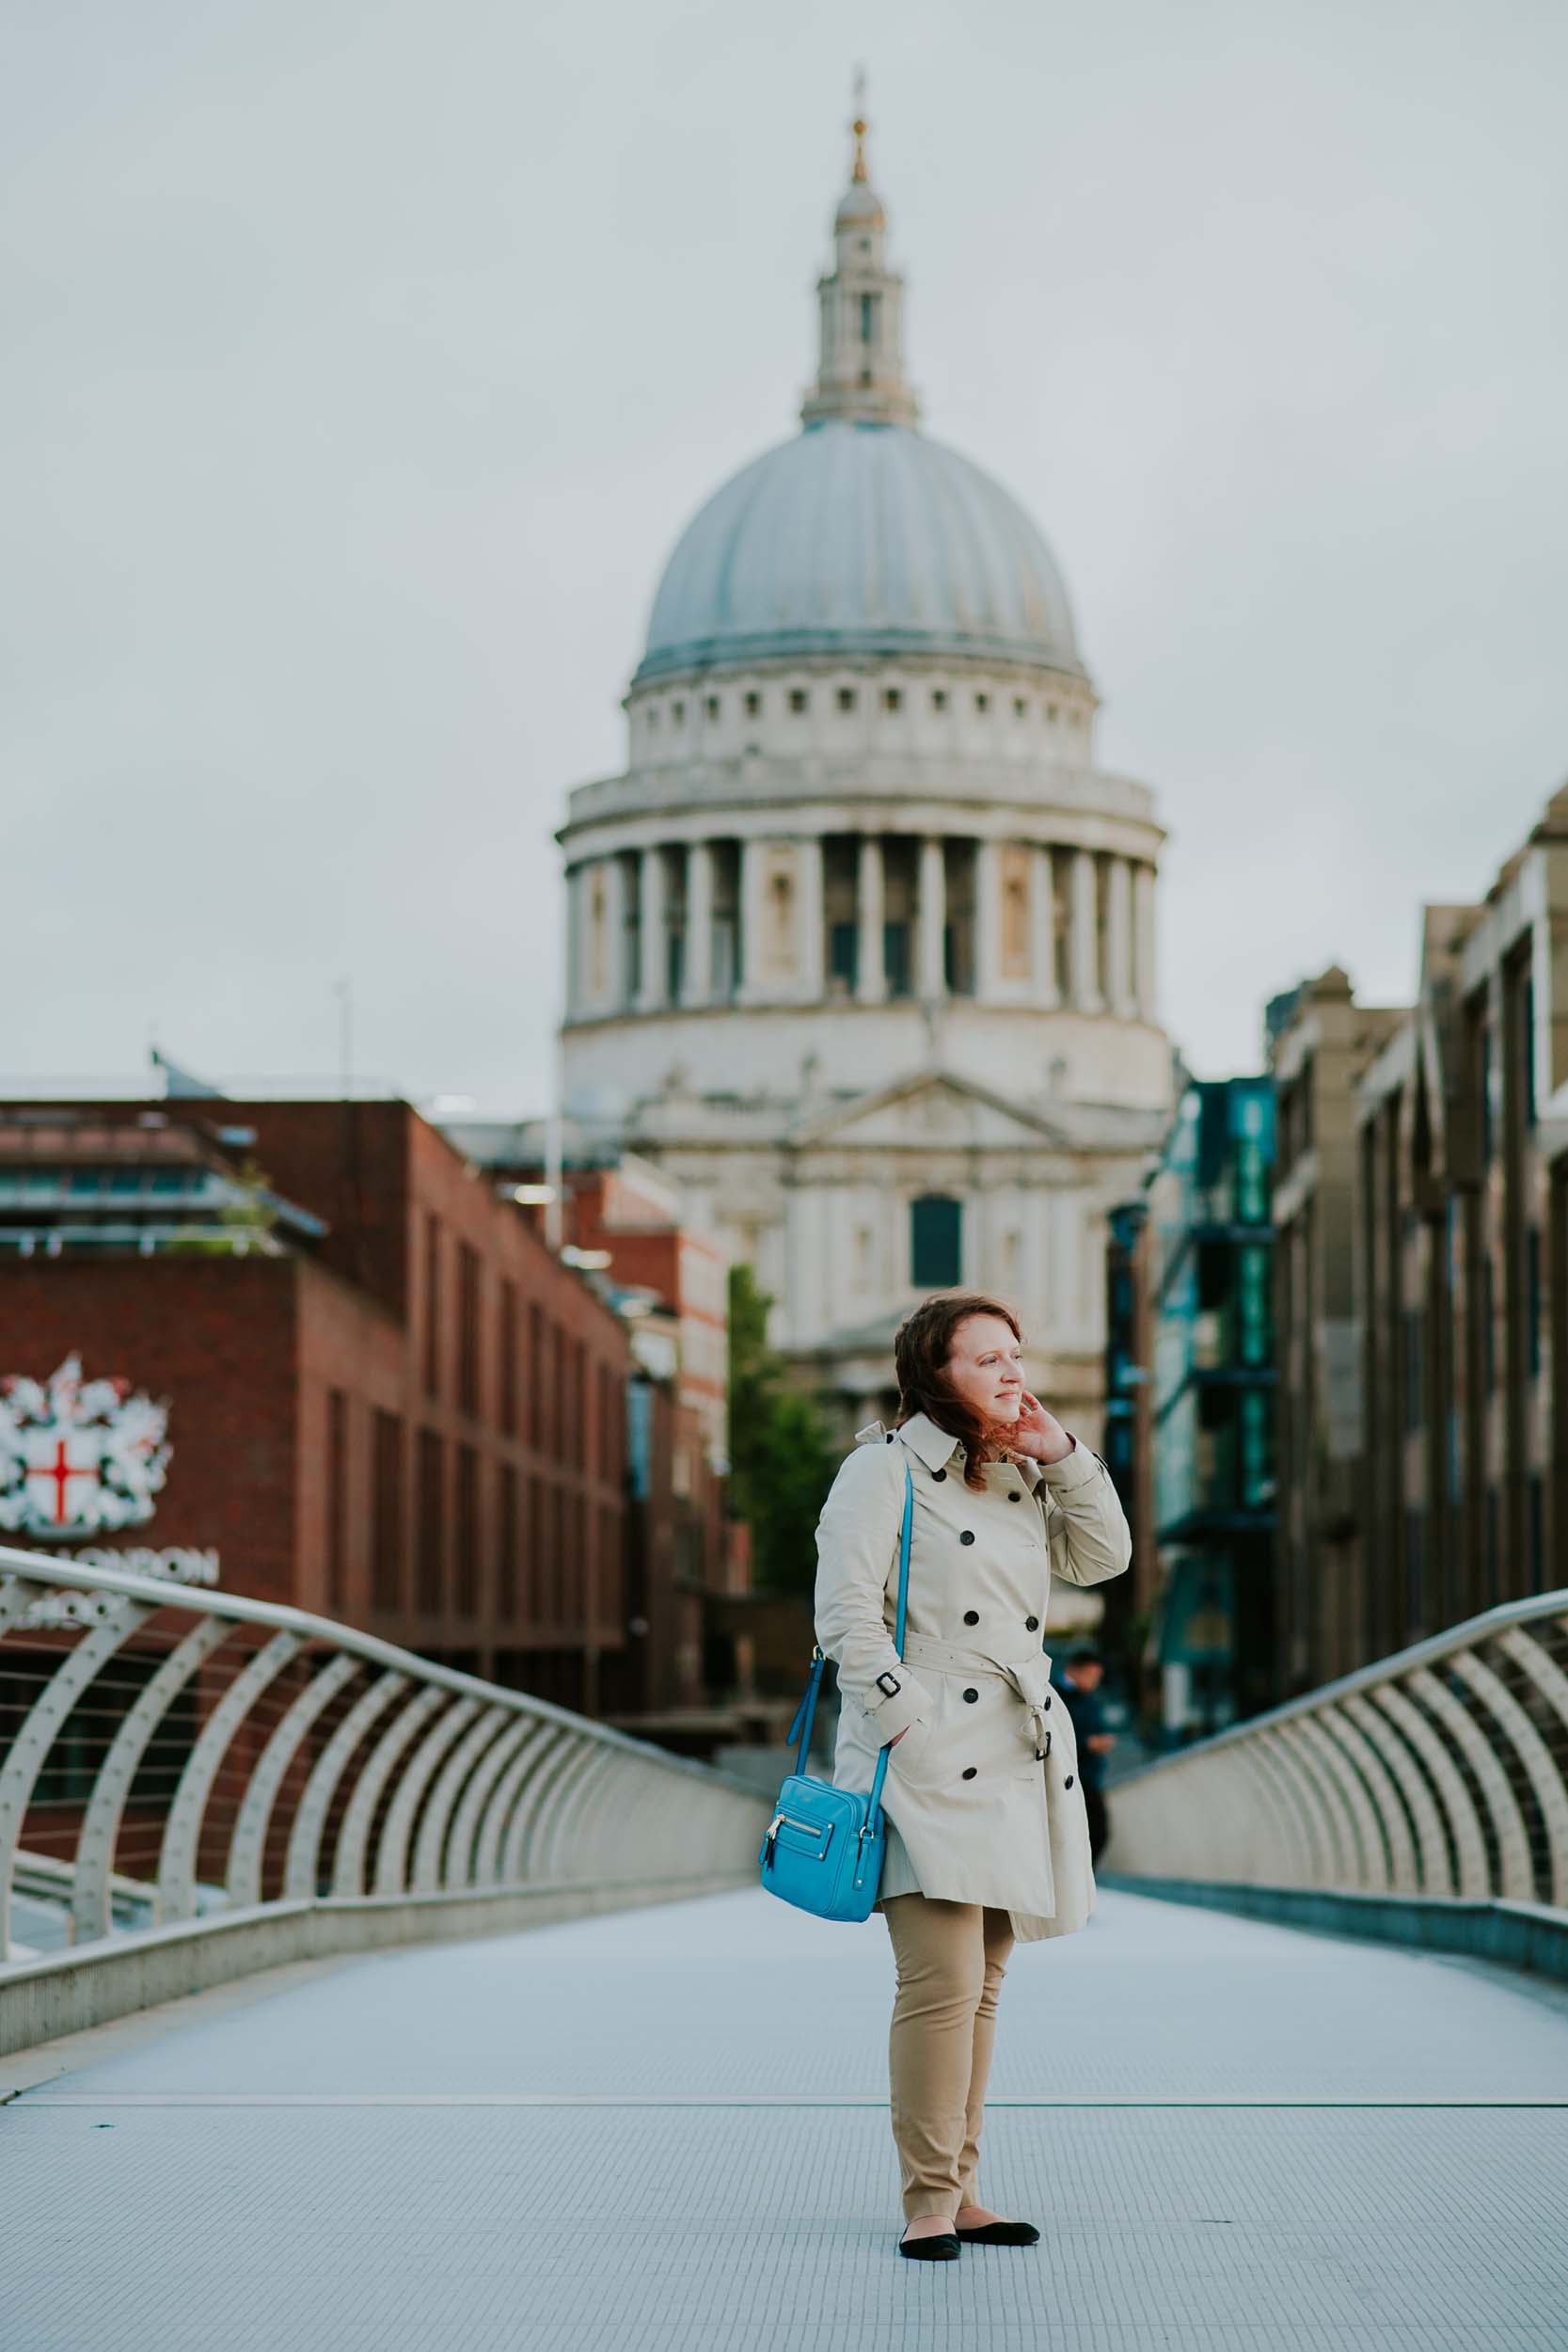 Top 5 Solo Experiences in London | Flytographer